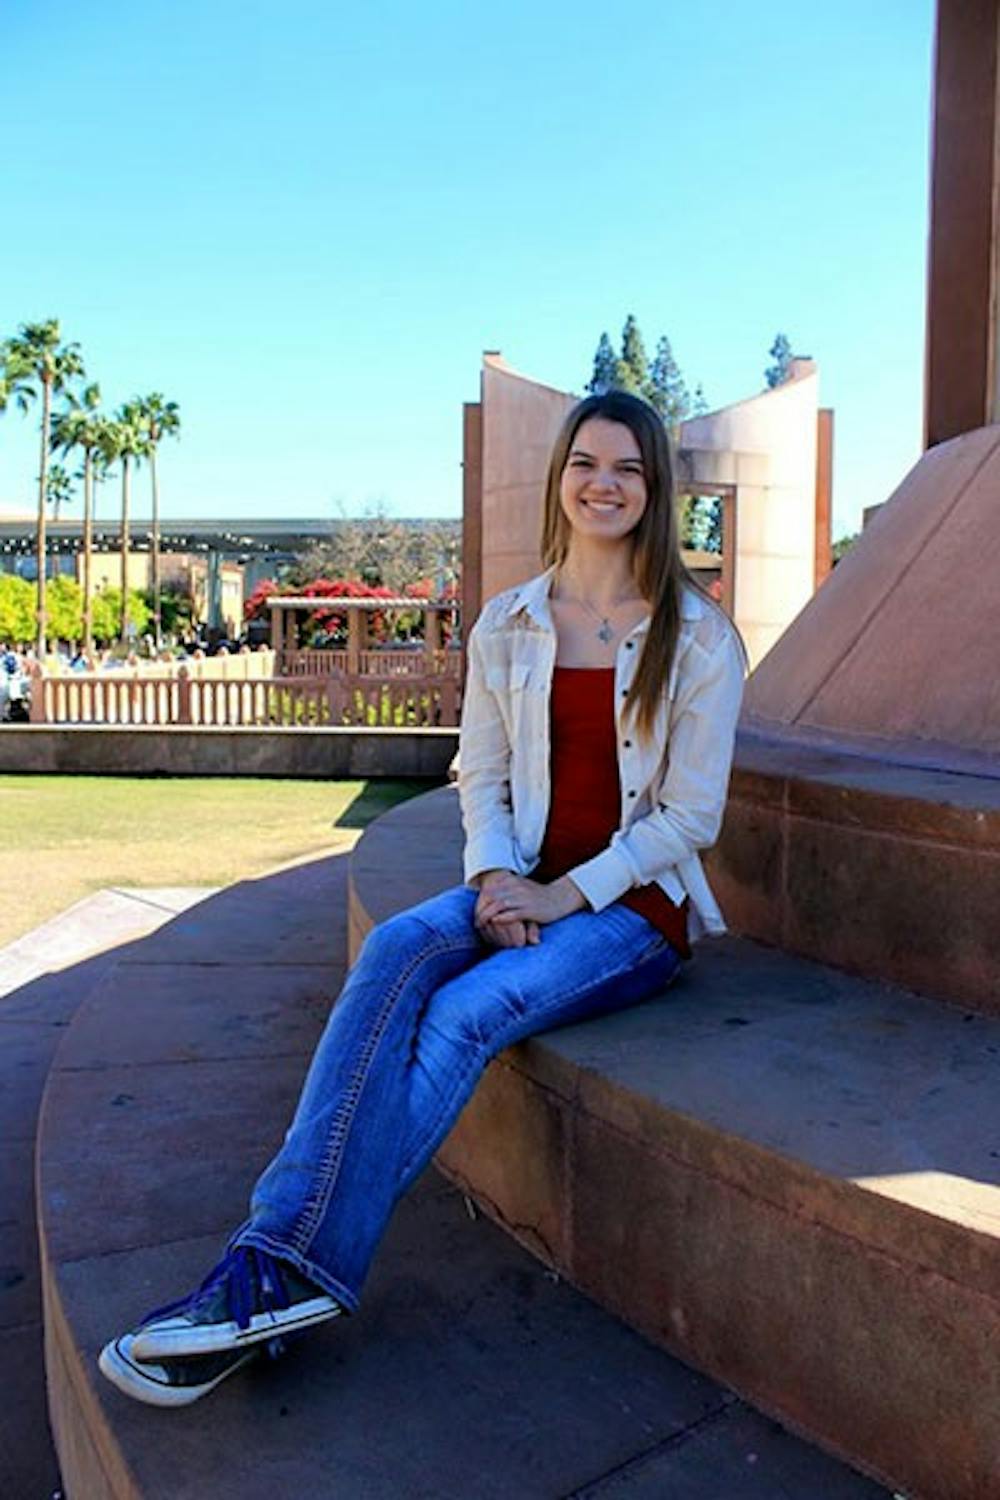 Justice studies freshman Erin Schulte will be a fellow with the Center for the Study of Religion and Conflict here at ASU for 2014 and 2015. Schulte will participate in a special class with the center’s director and work with faculty members on research projects. (Photo by Micaela Rodriguez)